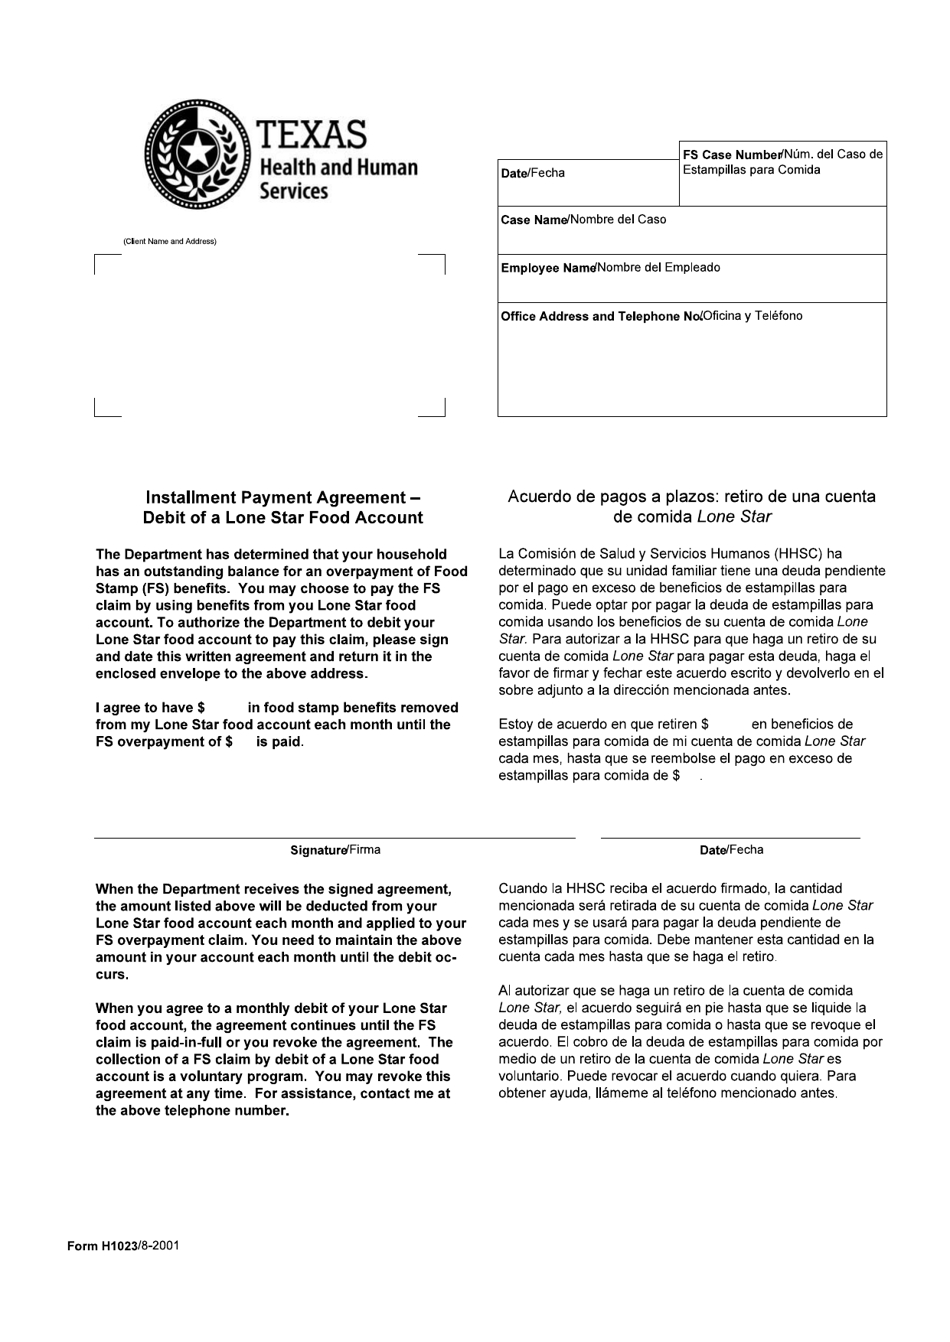 Form H1023 Installment Payment Agreement - Debit of a Lone Star Food Account - Texas (English / Spanish), Page 1